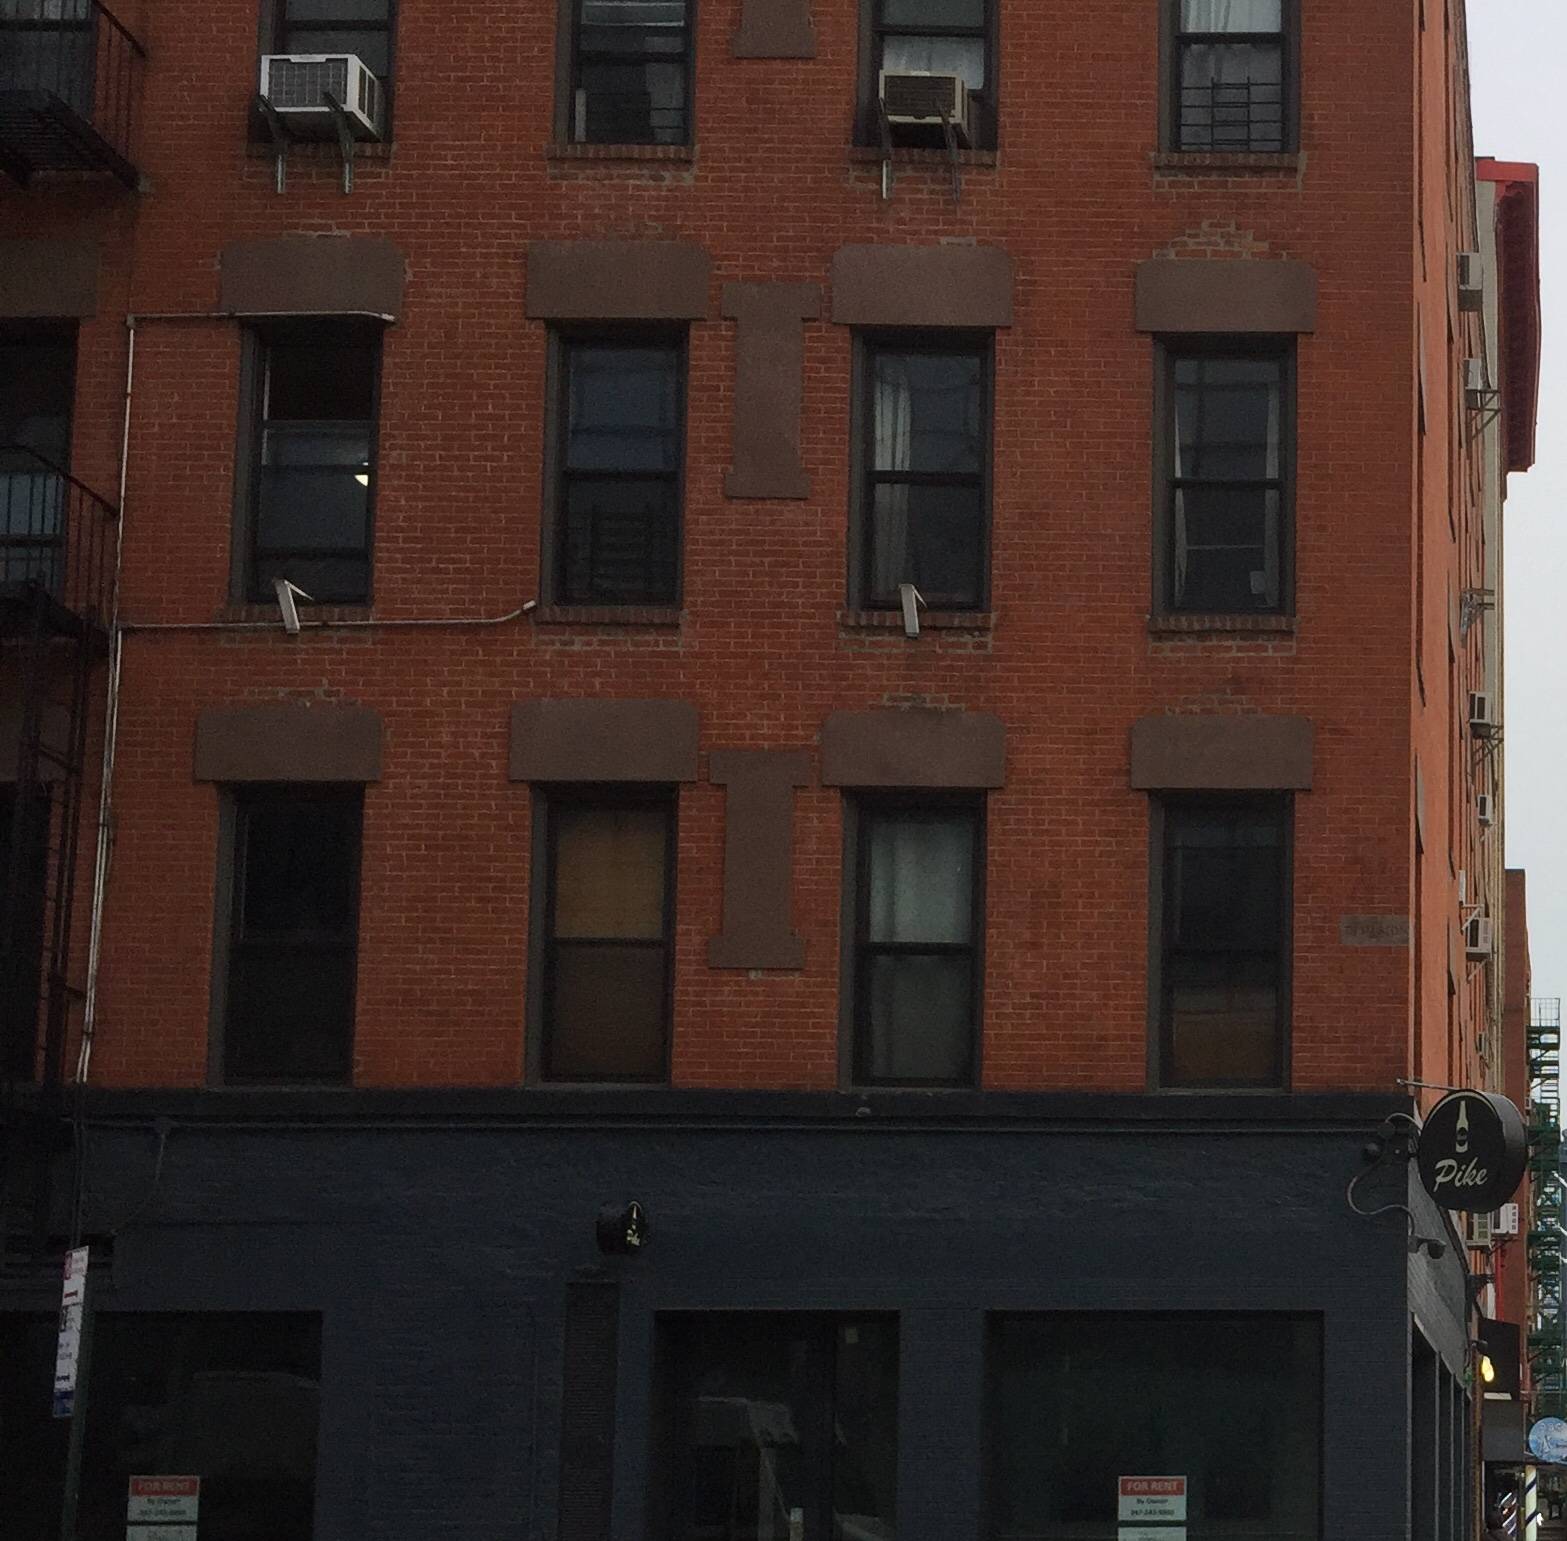 off market mix-used building for sale in Chinatown